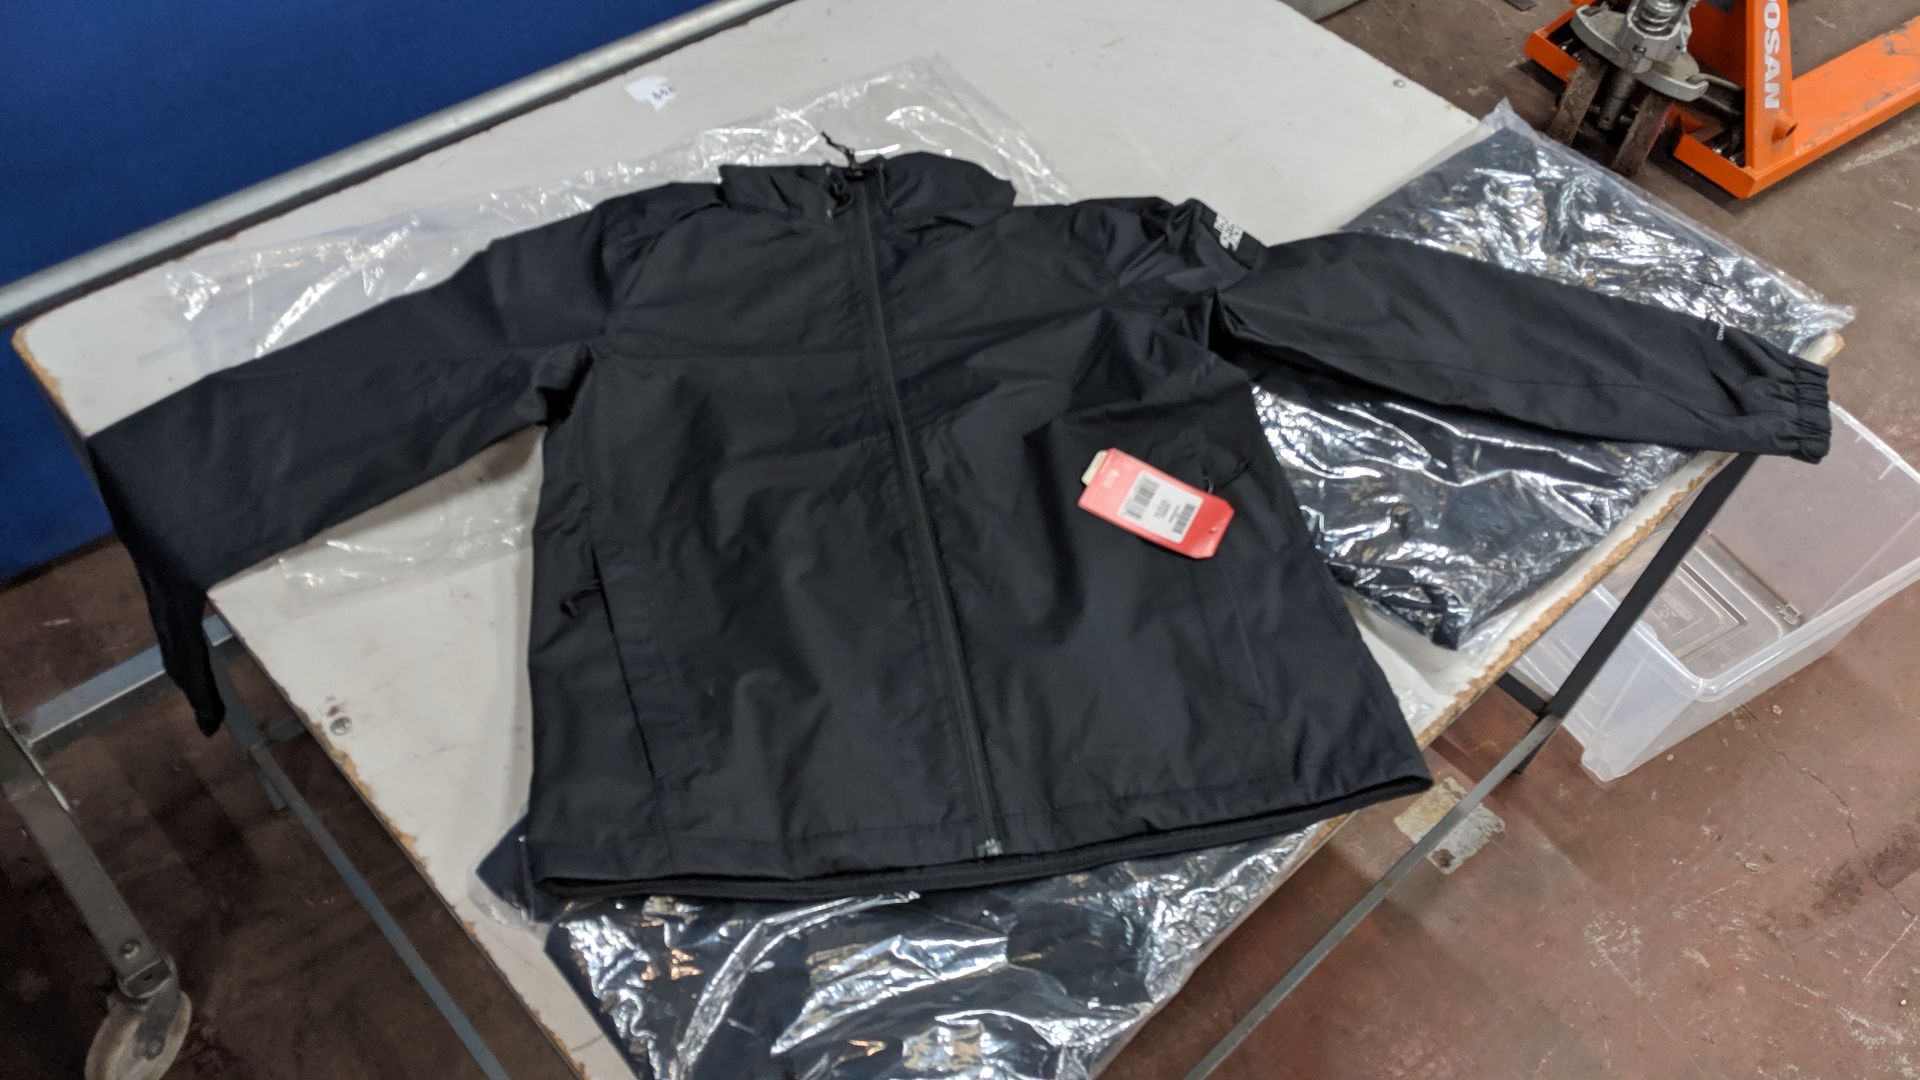 3 off North Face black jackets/coats. This is one of a number of lots being sold on behalf of the - Image 2 of 5